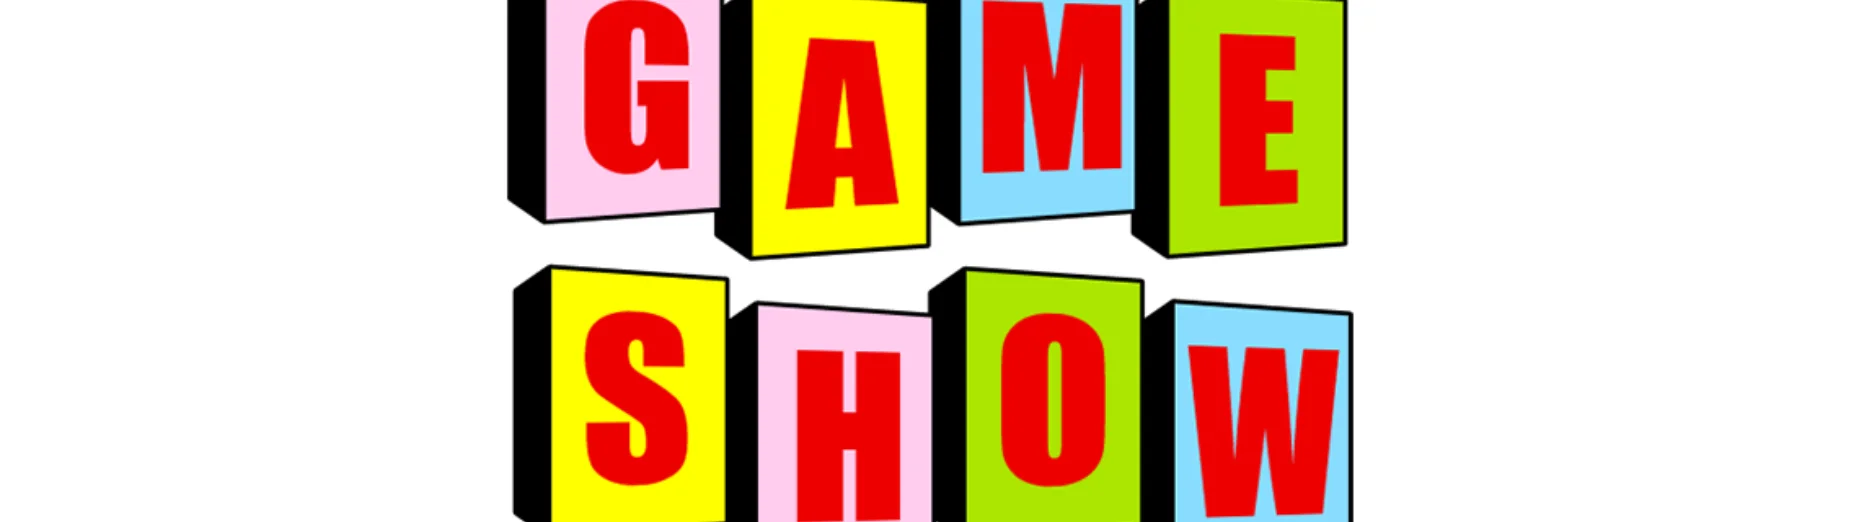 Mê Game Shows's cover photo